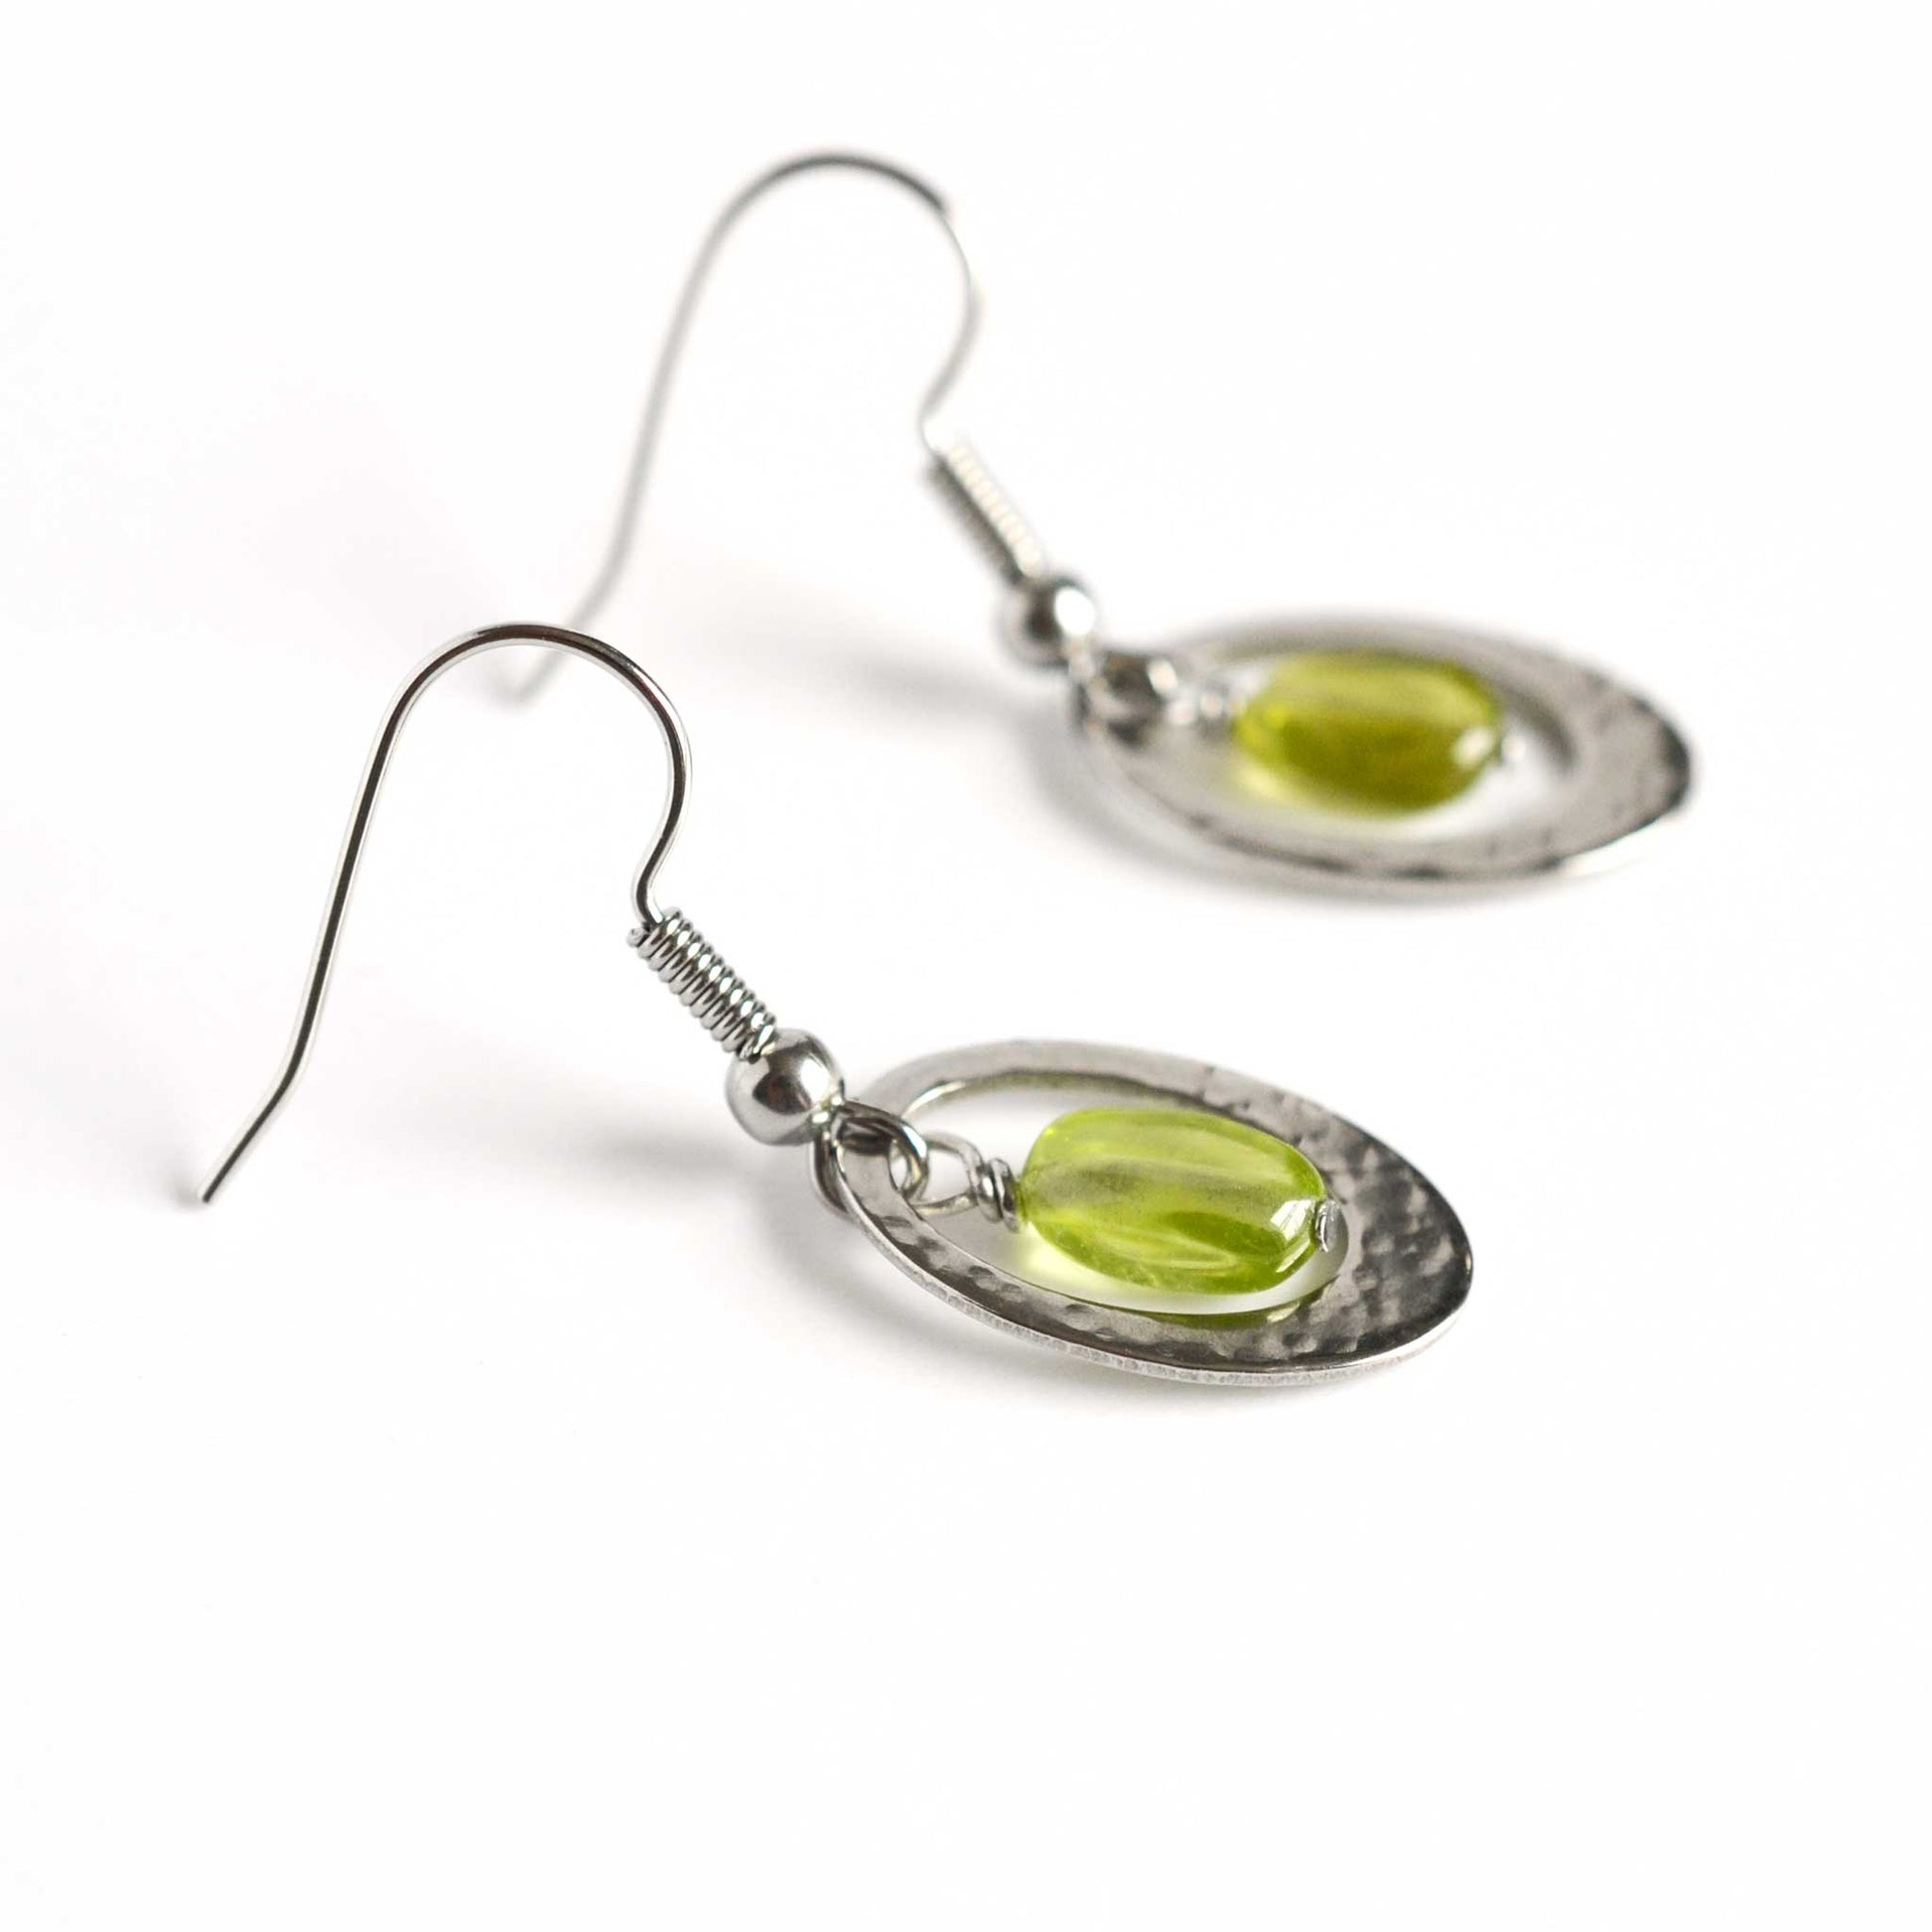 Side view detail of green Peridot gemstone and steel hammered oval drop earrings.